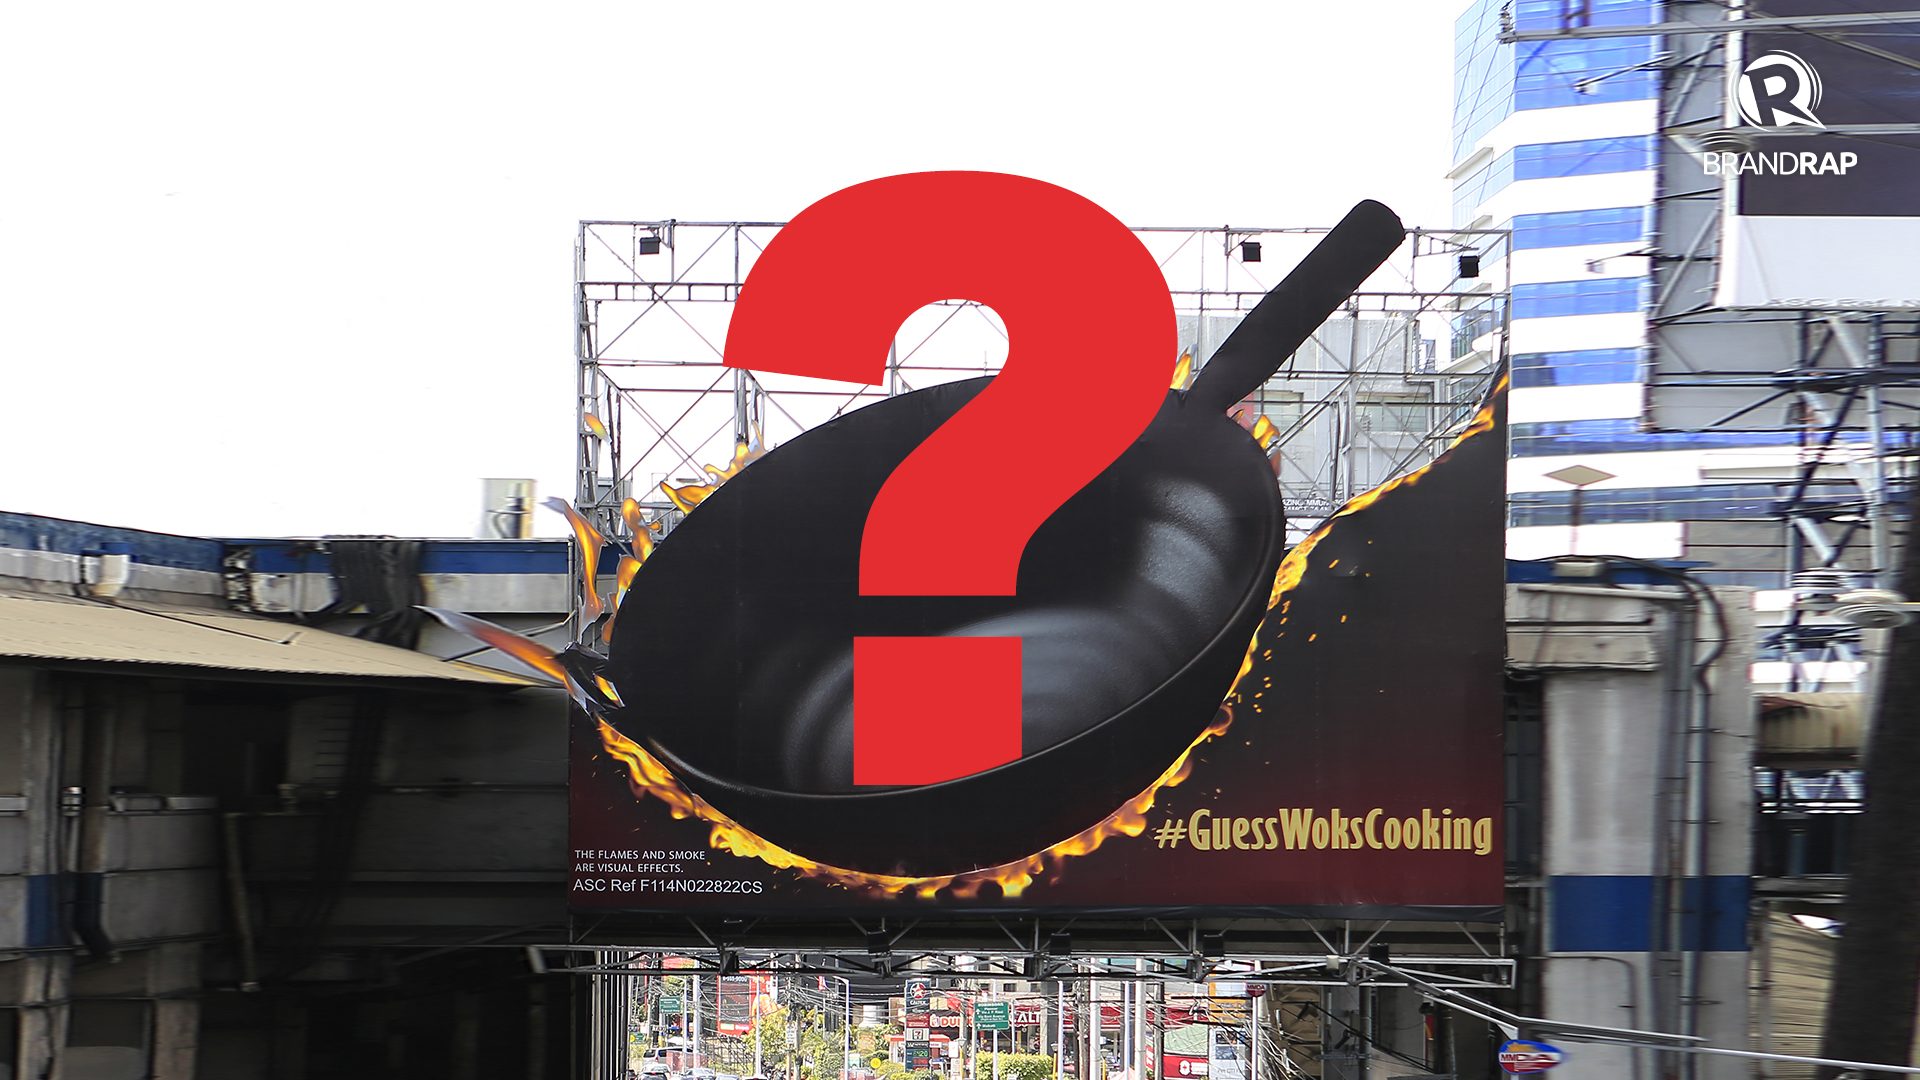 Big wok, what's cooking?